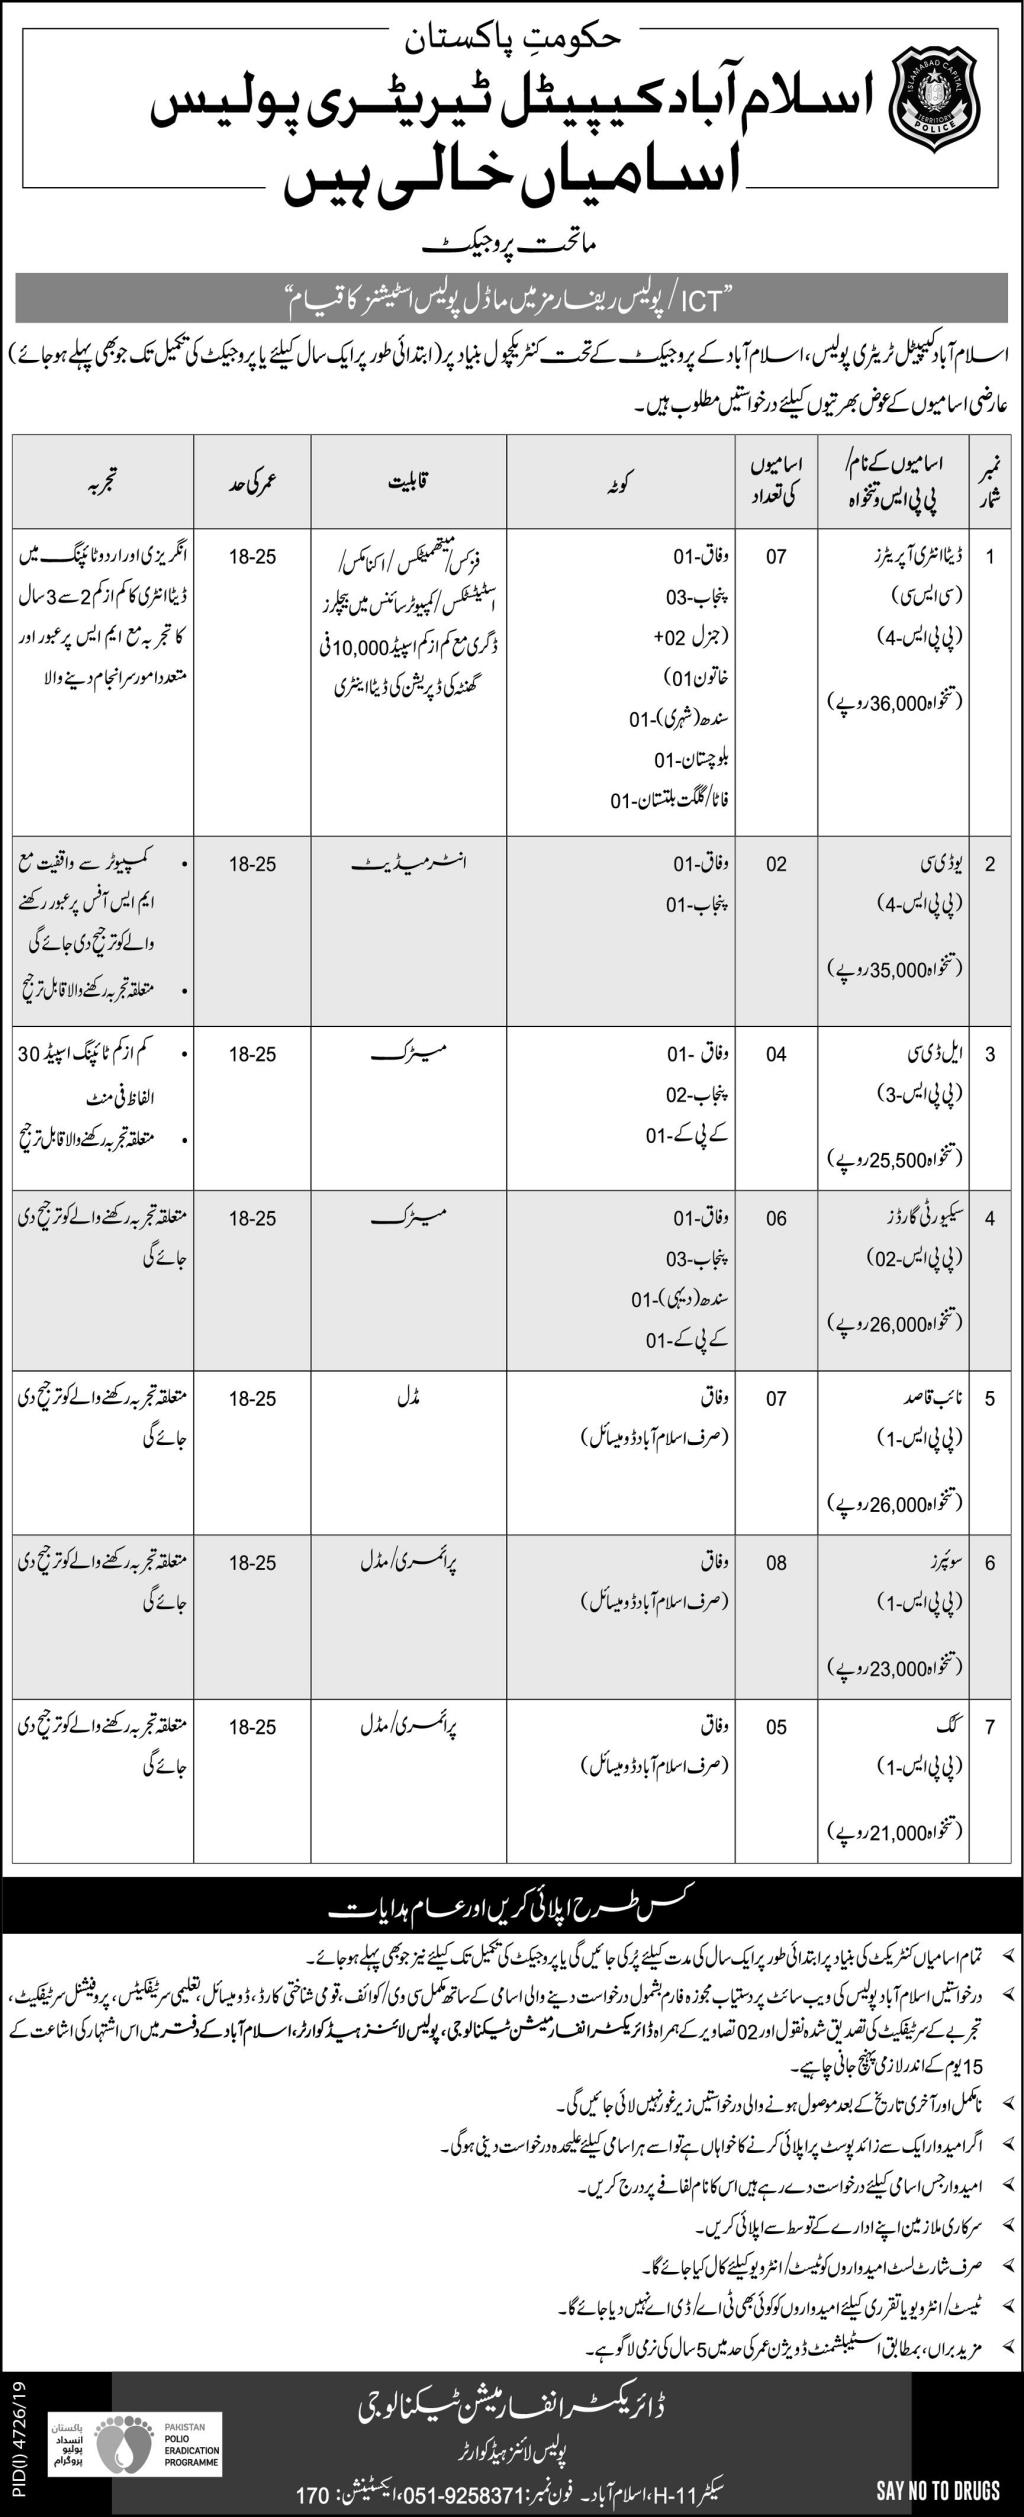 Multiple Positions-Islamabad Capital Terrtitory Police-Latest Jobs in Pakistan 2020